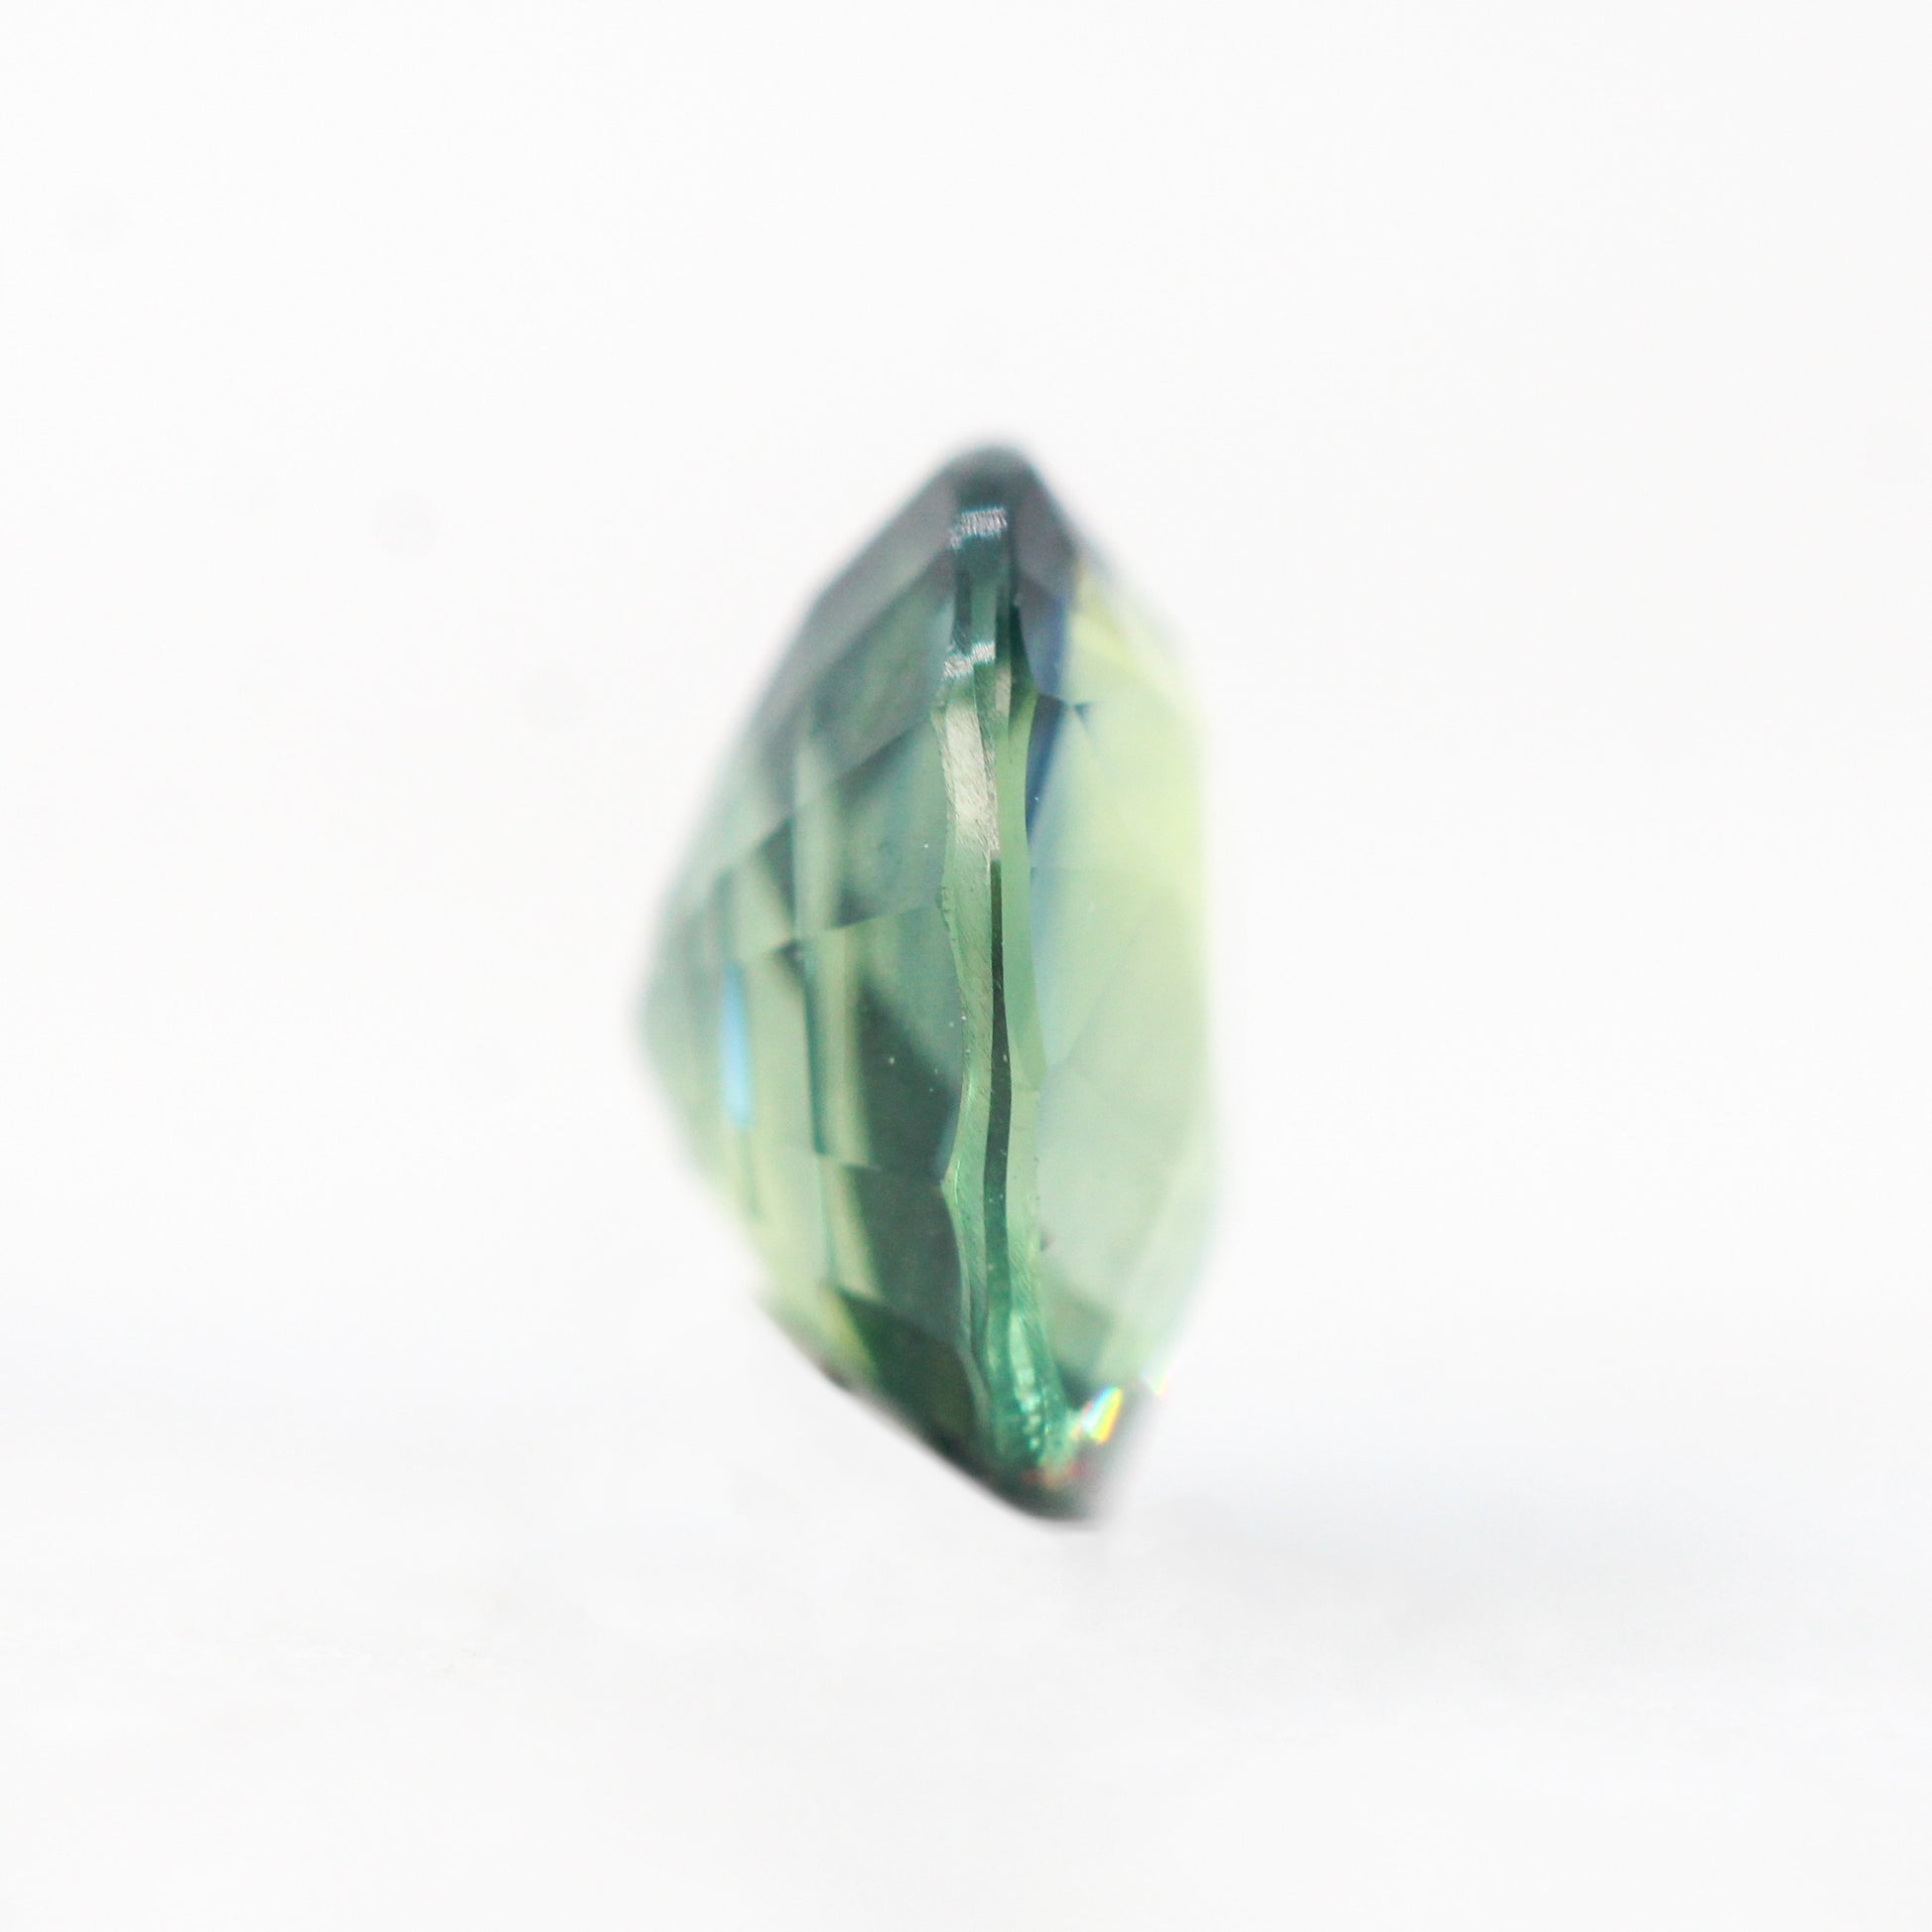 1.02 Carat Light Teal Rounded Oval Sapphire for Custom Work - Inventory Code TOS102 - Midwinter Co. Alternative Bridal Rings and Modern Fine Jewelry